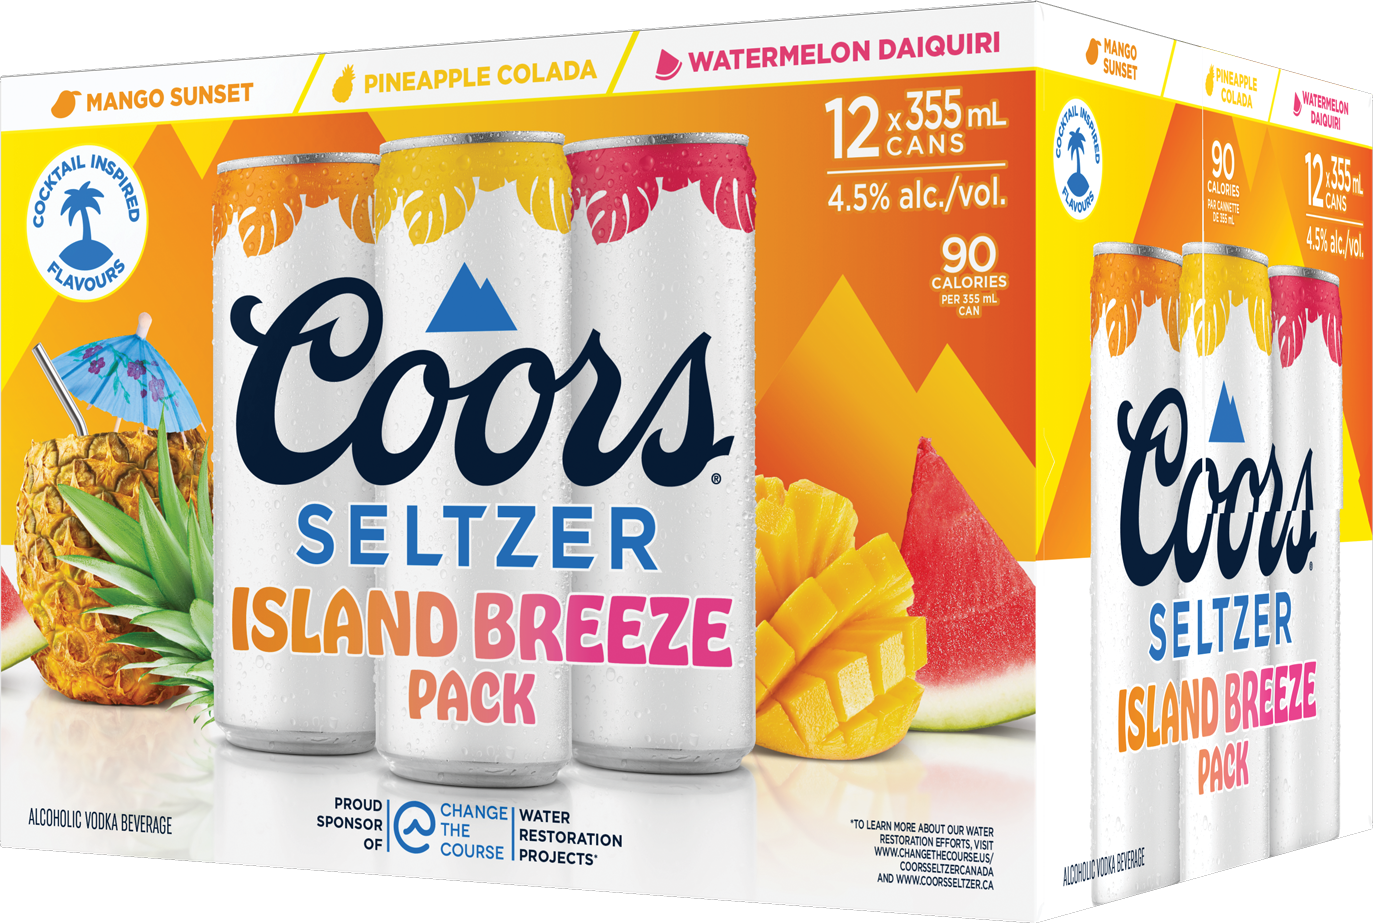 Assorted Coors Seltzer Island Breeze pack with mango, pineapple, and watermelon flavors